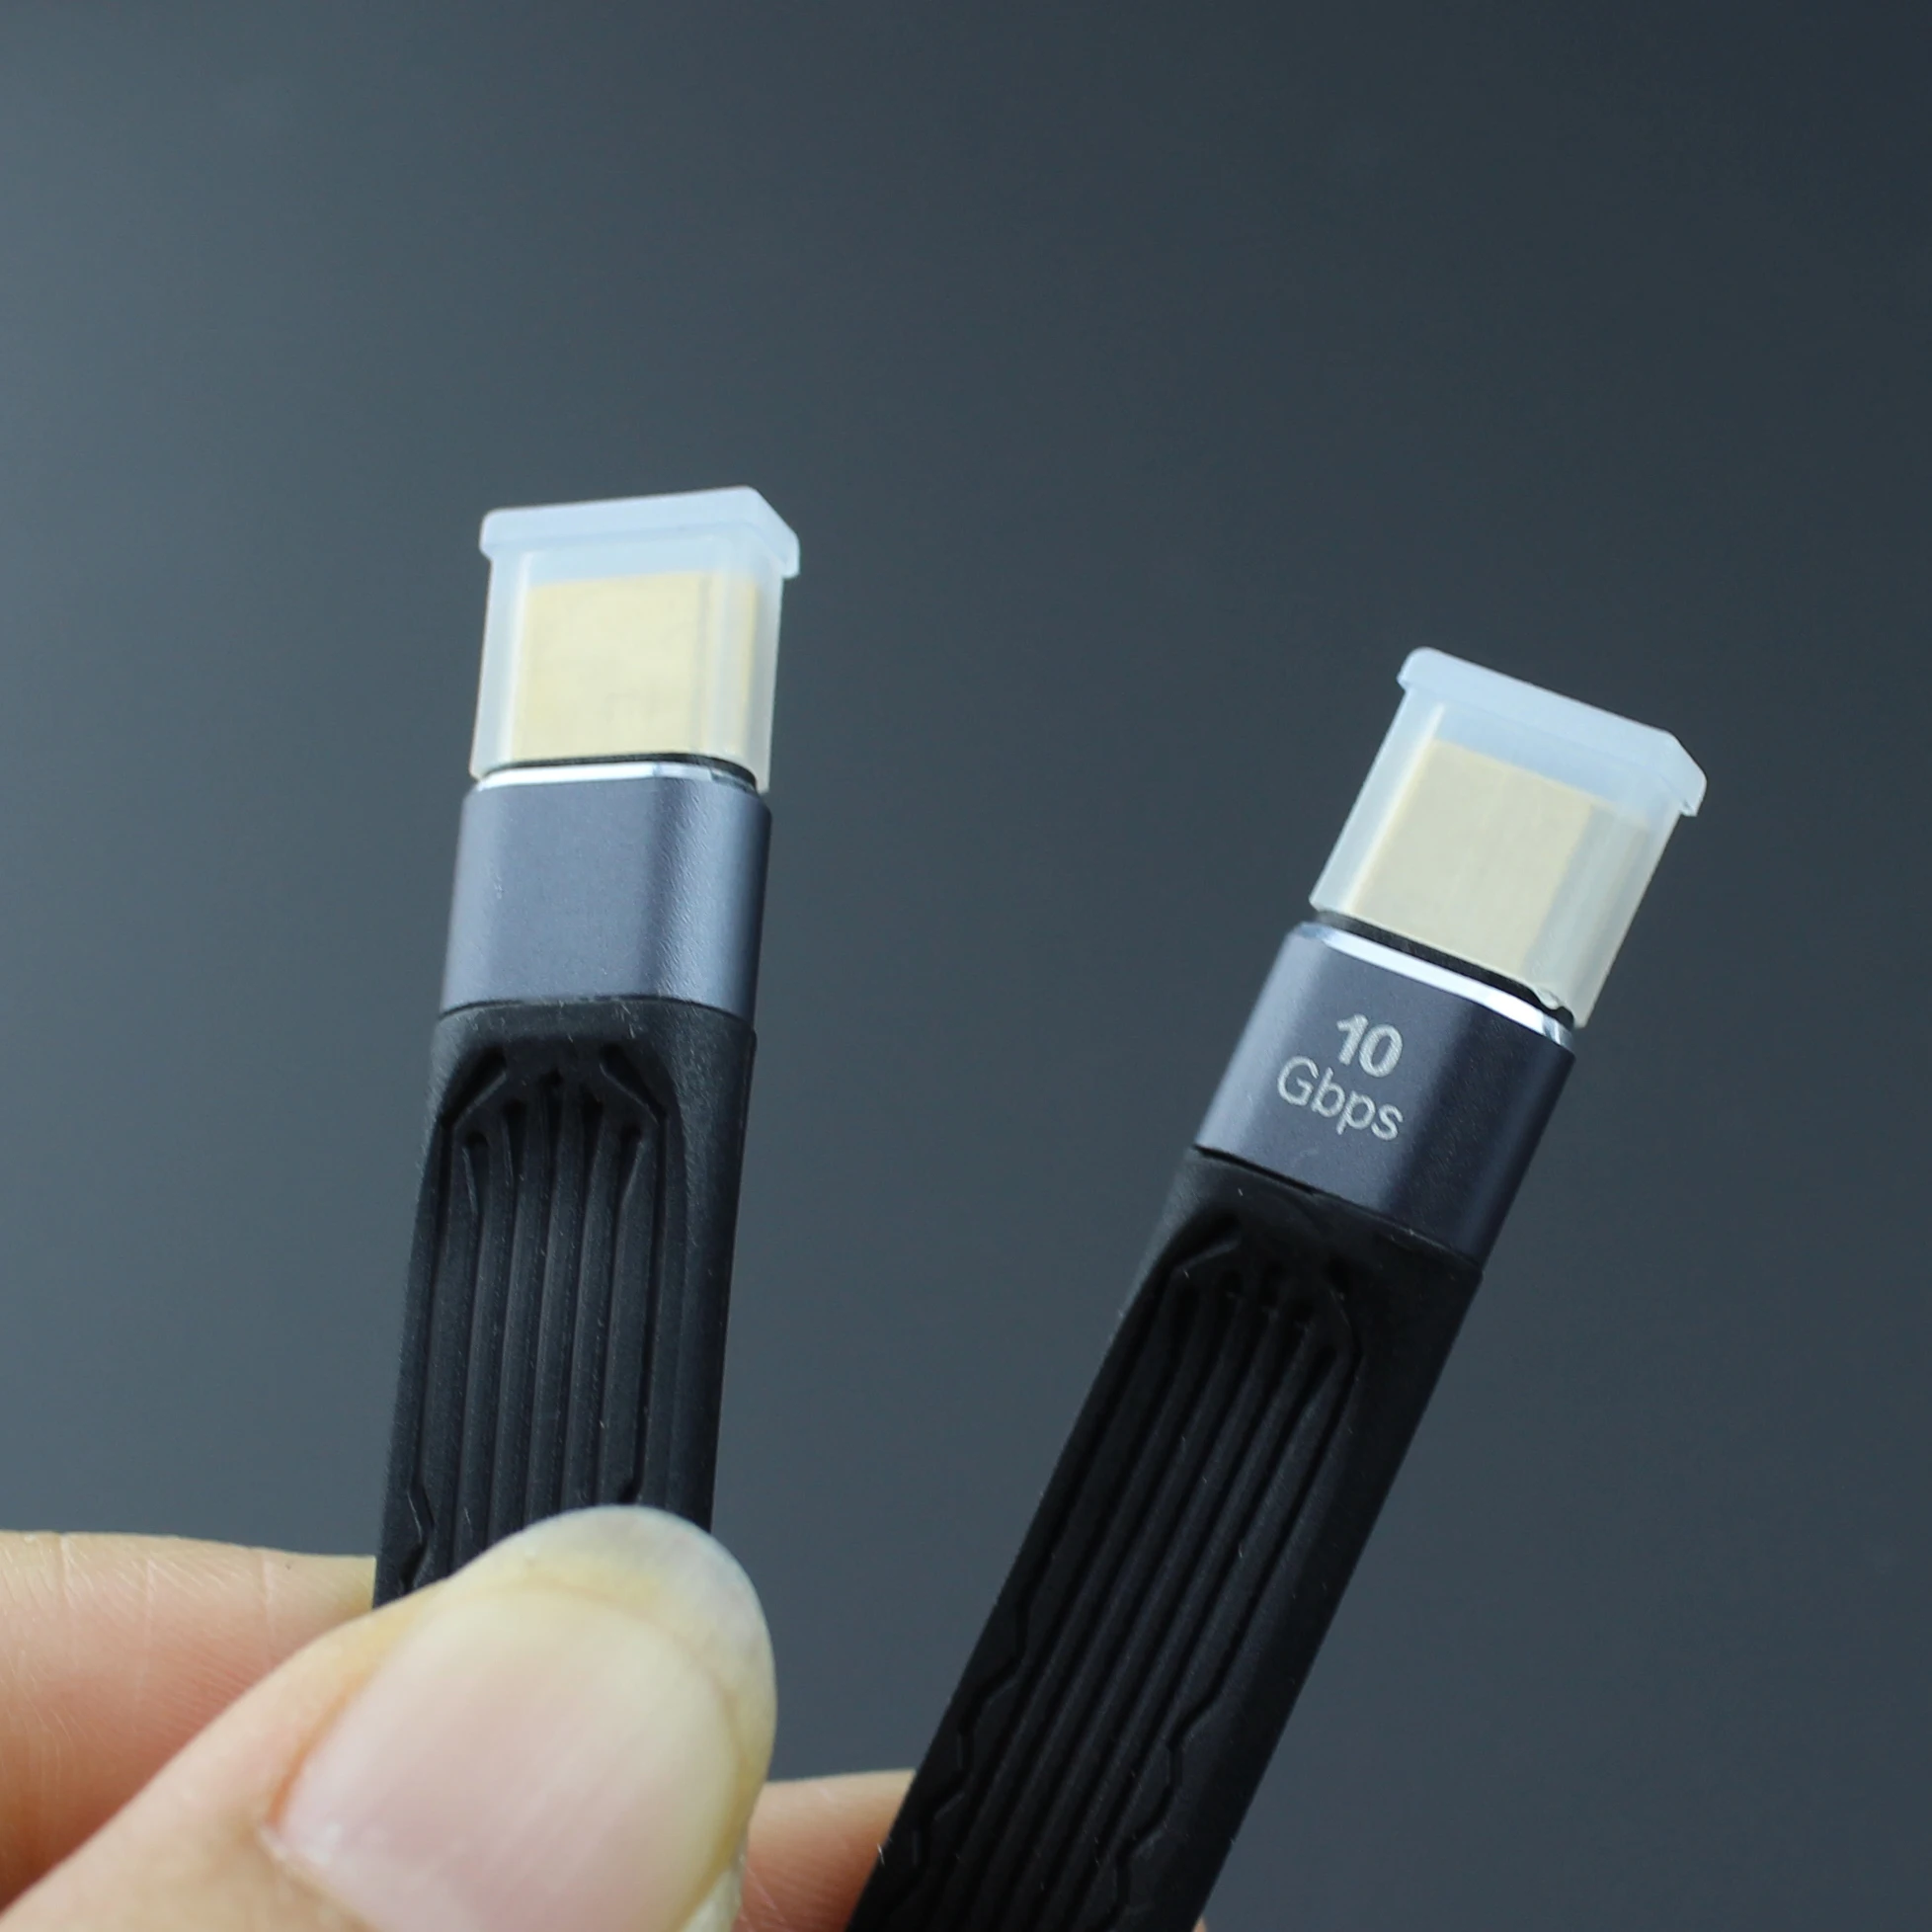 

1pcs 13CM USB-C USB3.1 10Gbps Short Type C Male To Male OTG video sync PD charger cable 4K video for phone macbook pro Ma-1206